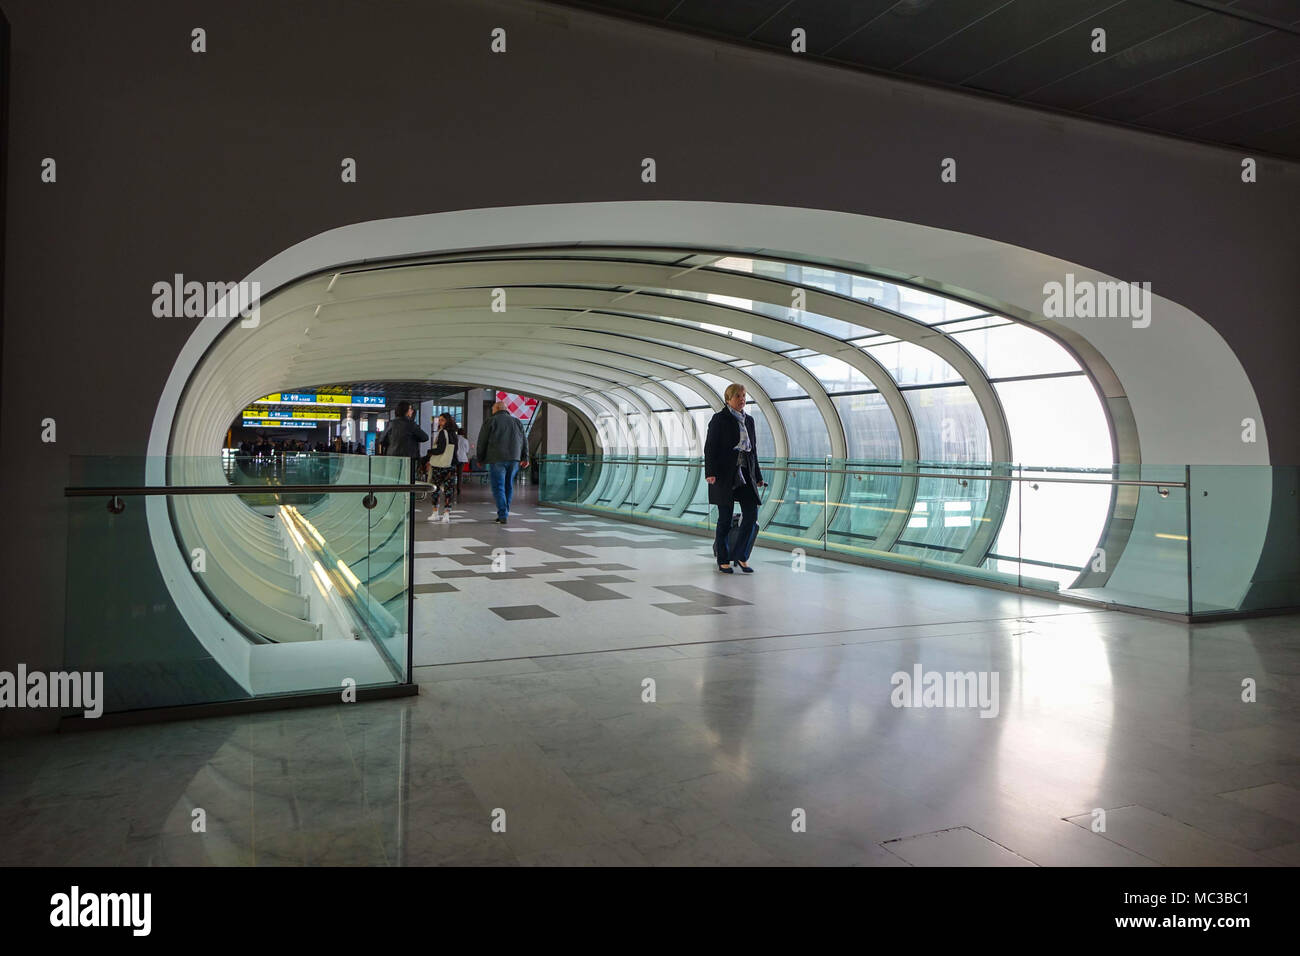 Pedestrian tunnel with people walking through, Toulouse Blagnac airport, France Stock Photo